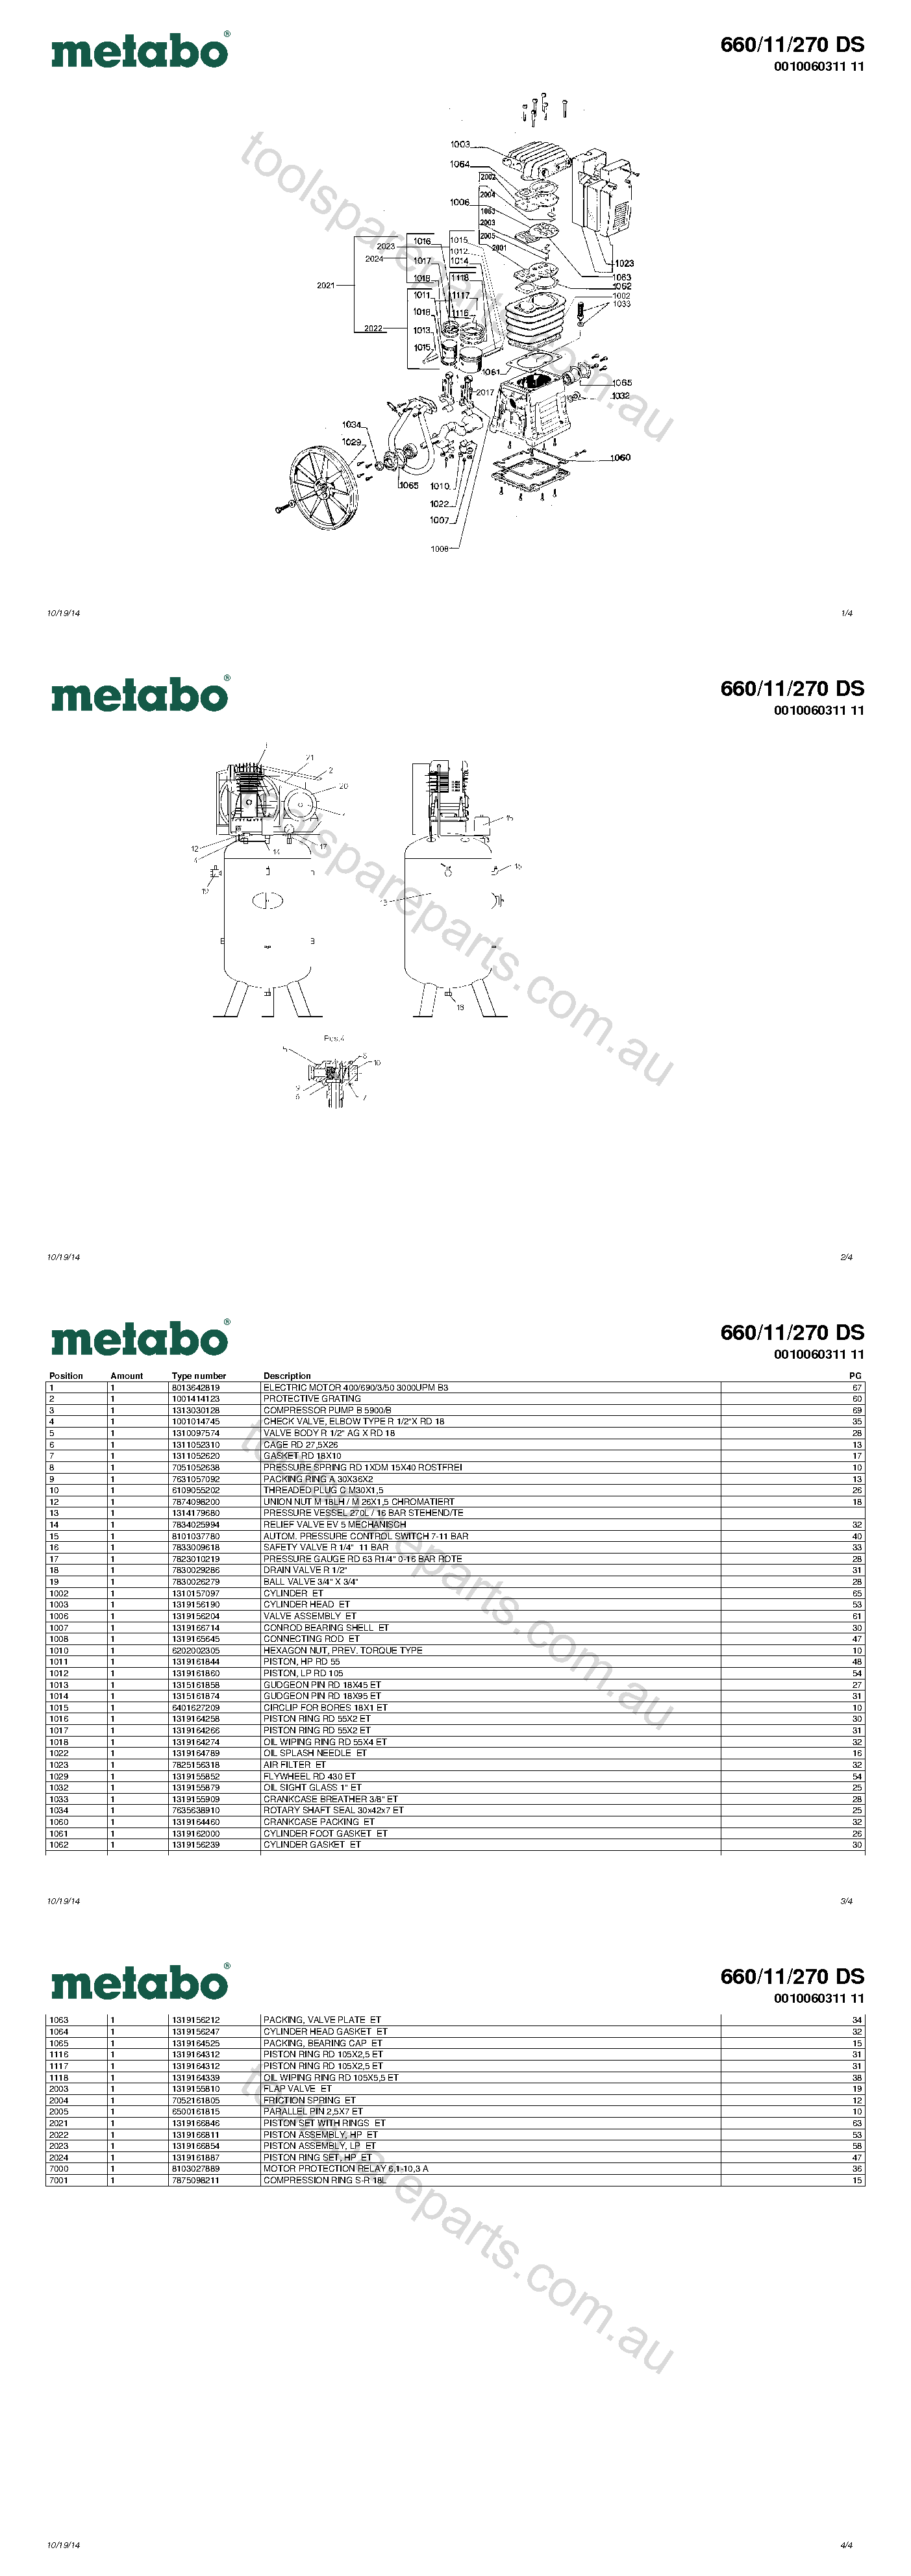 Metabo 660/11/270 DS 0010060311 11  Diagram 1